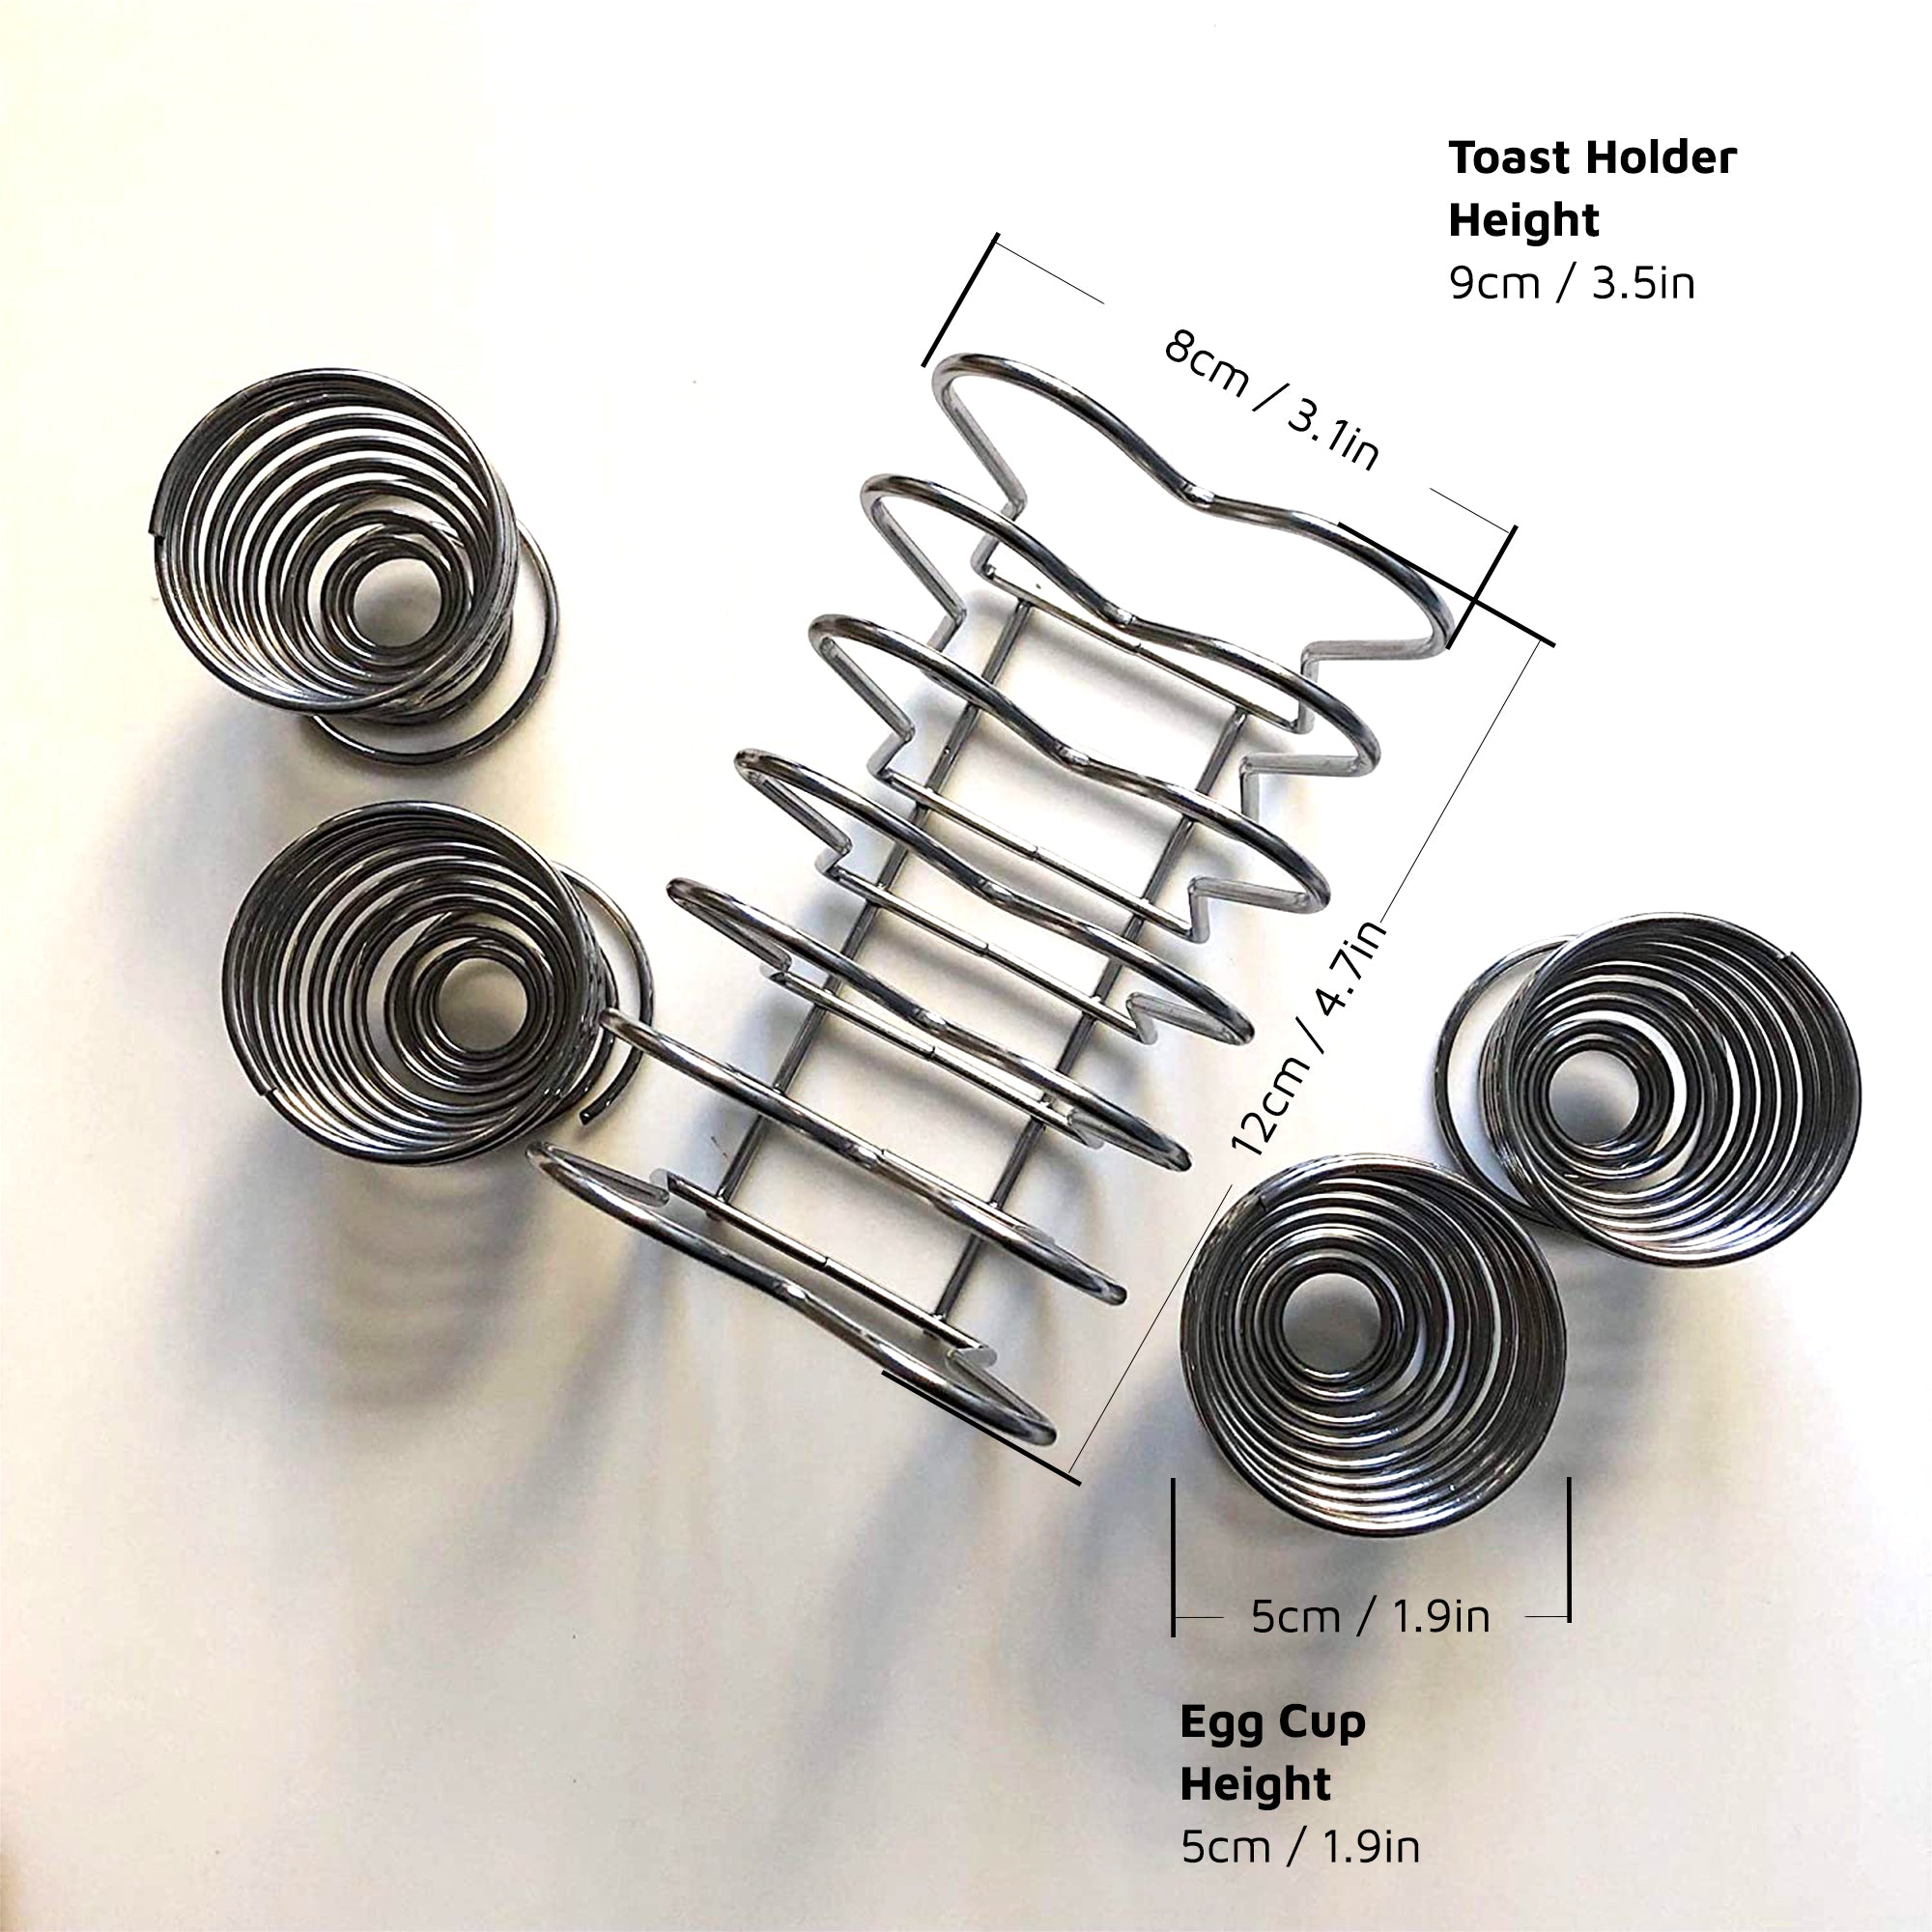 Spiral Chrome Egg Cups and Toast Holder Set